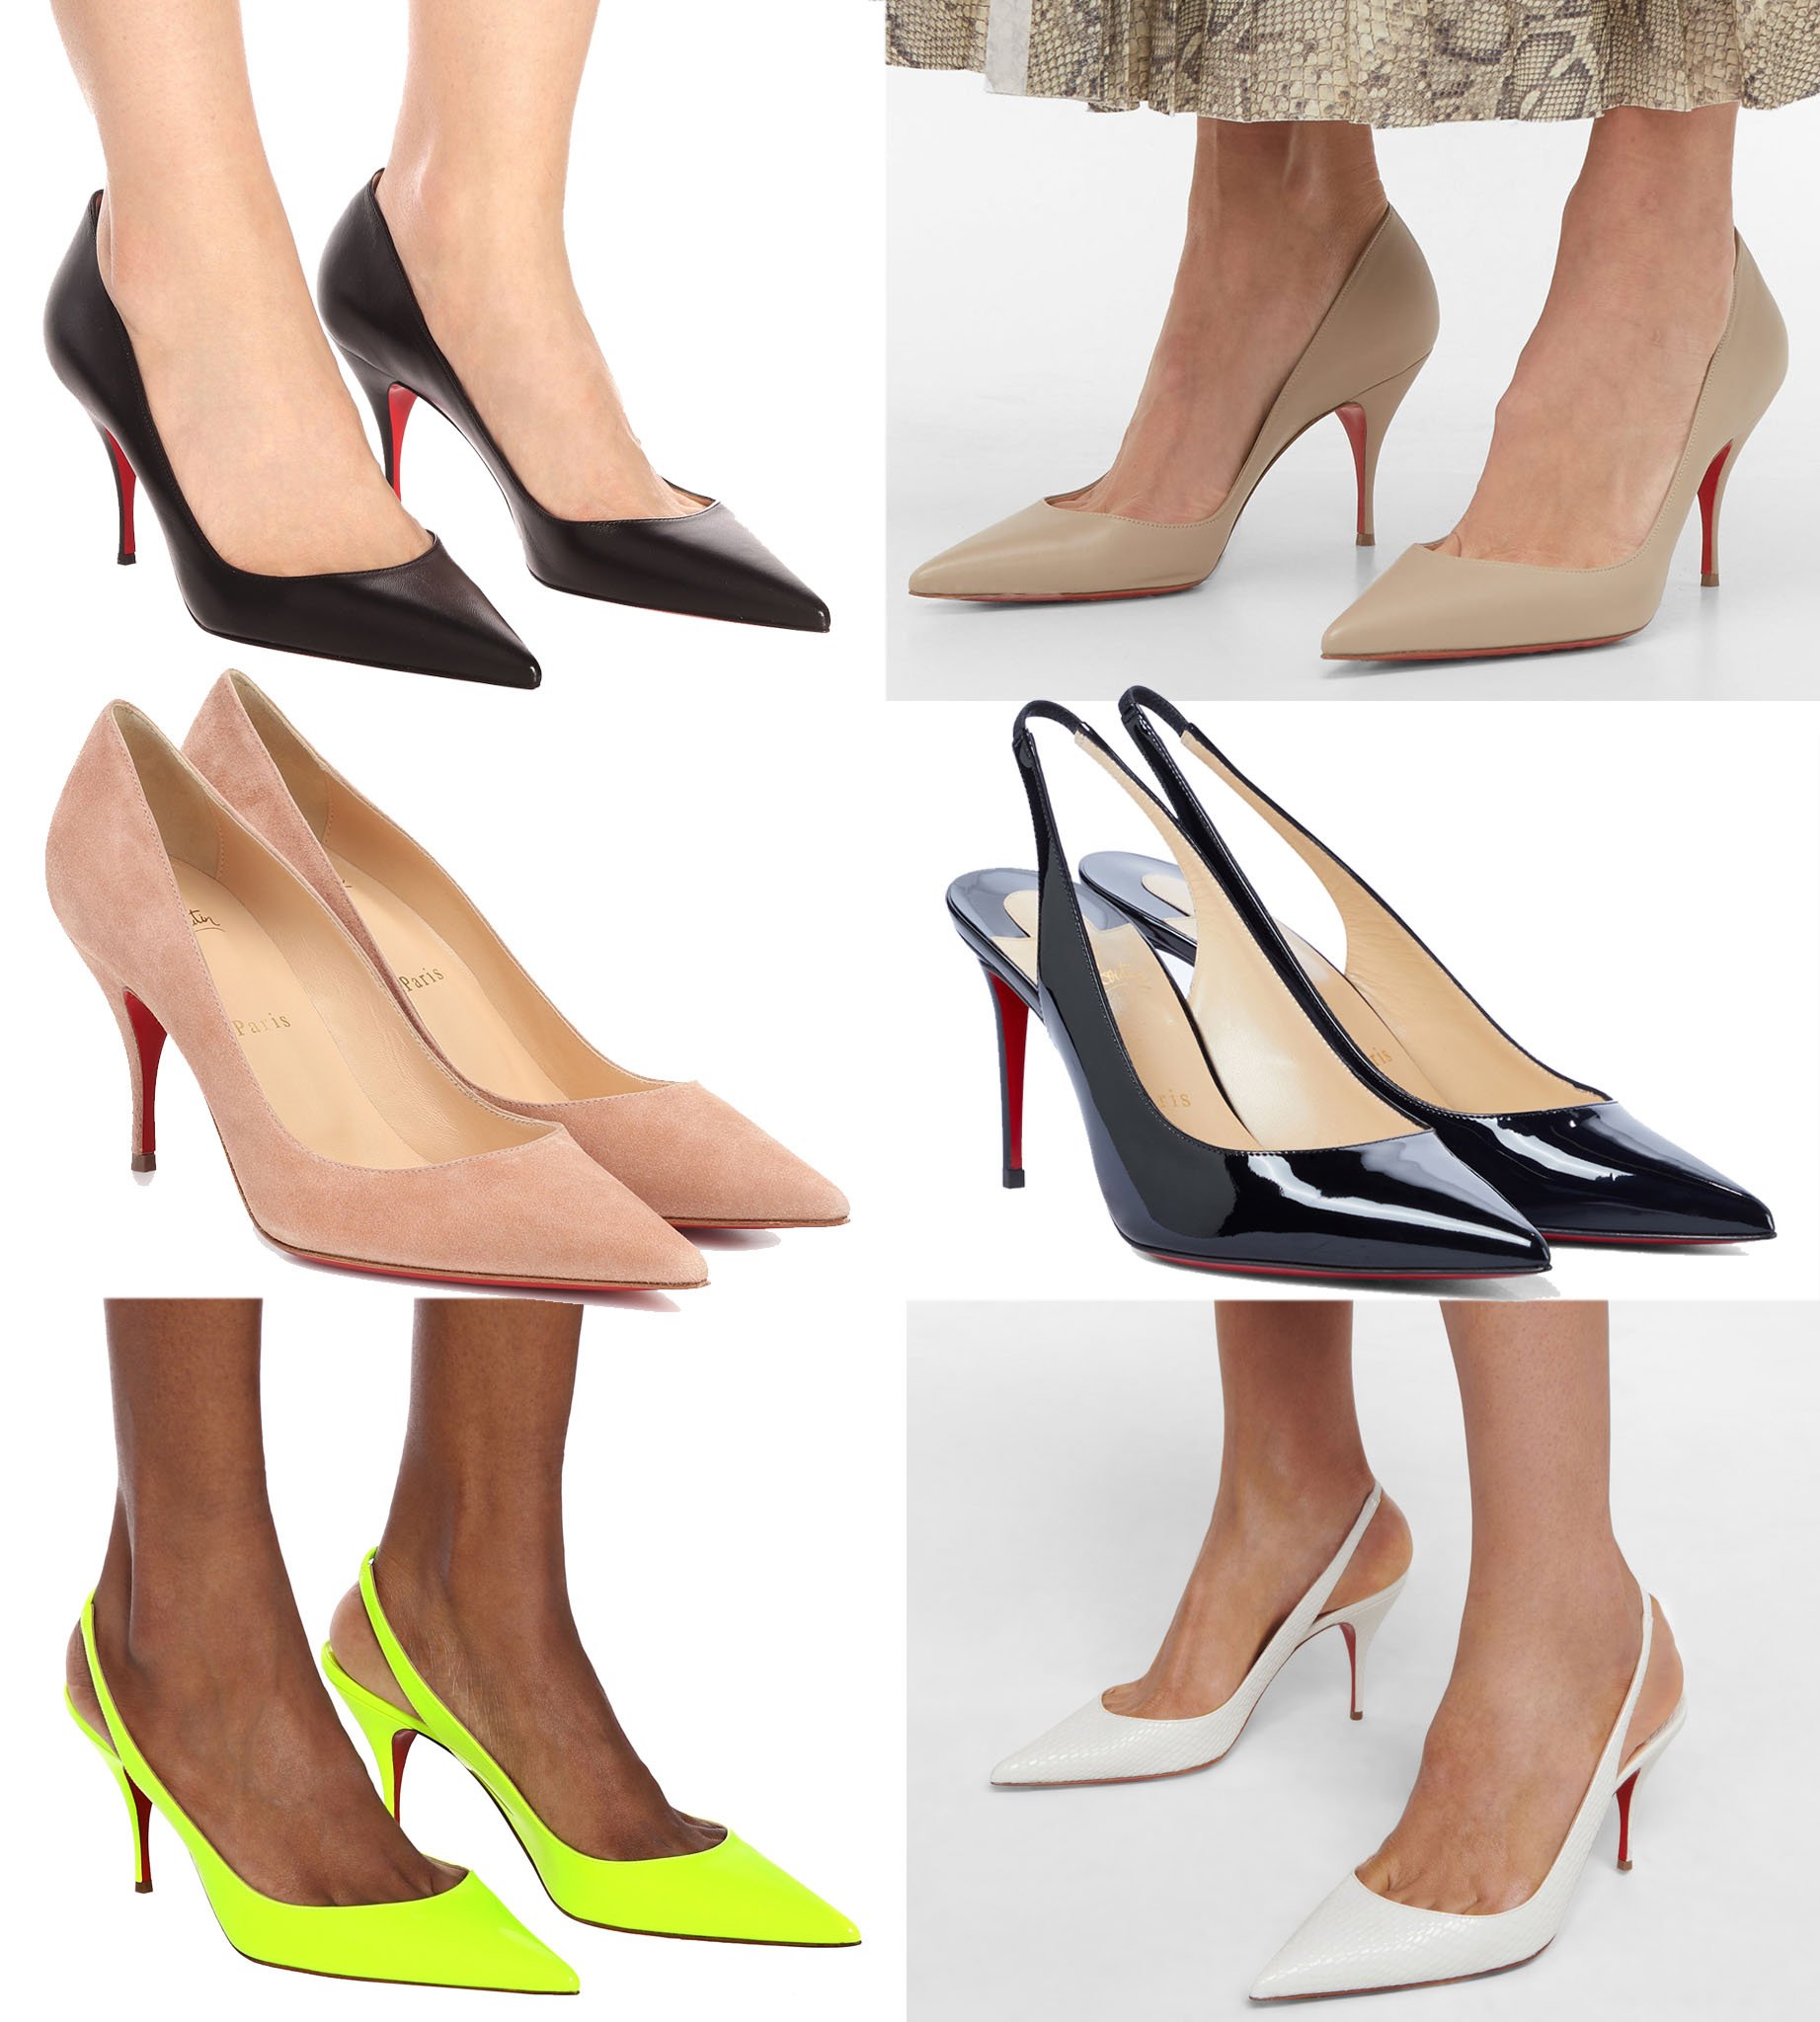 Best 25+ Deals for Lou Boutin Shoes